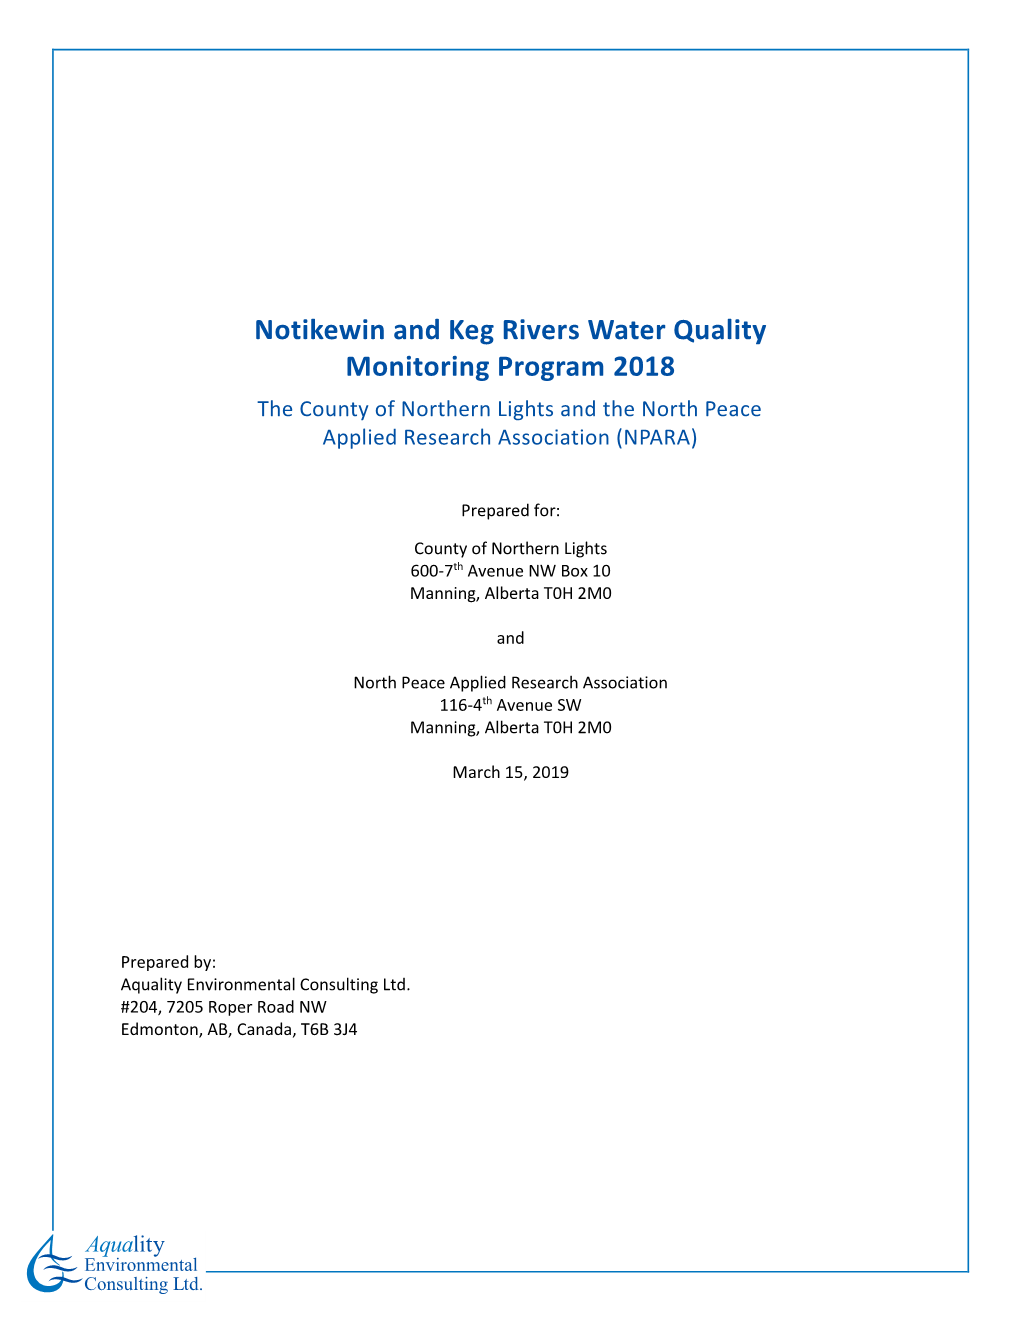 Notikewin and Keg Rivers Water Quality Monitoring Program 2018 the County of Northern Lights and the North Peace Applied Research Association (NPARA)